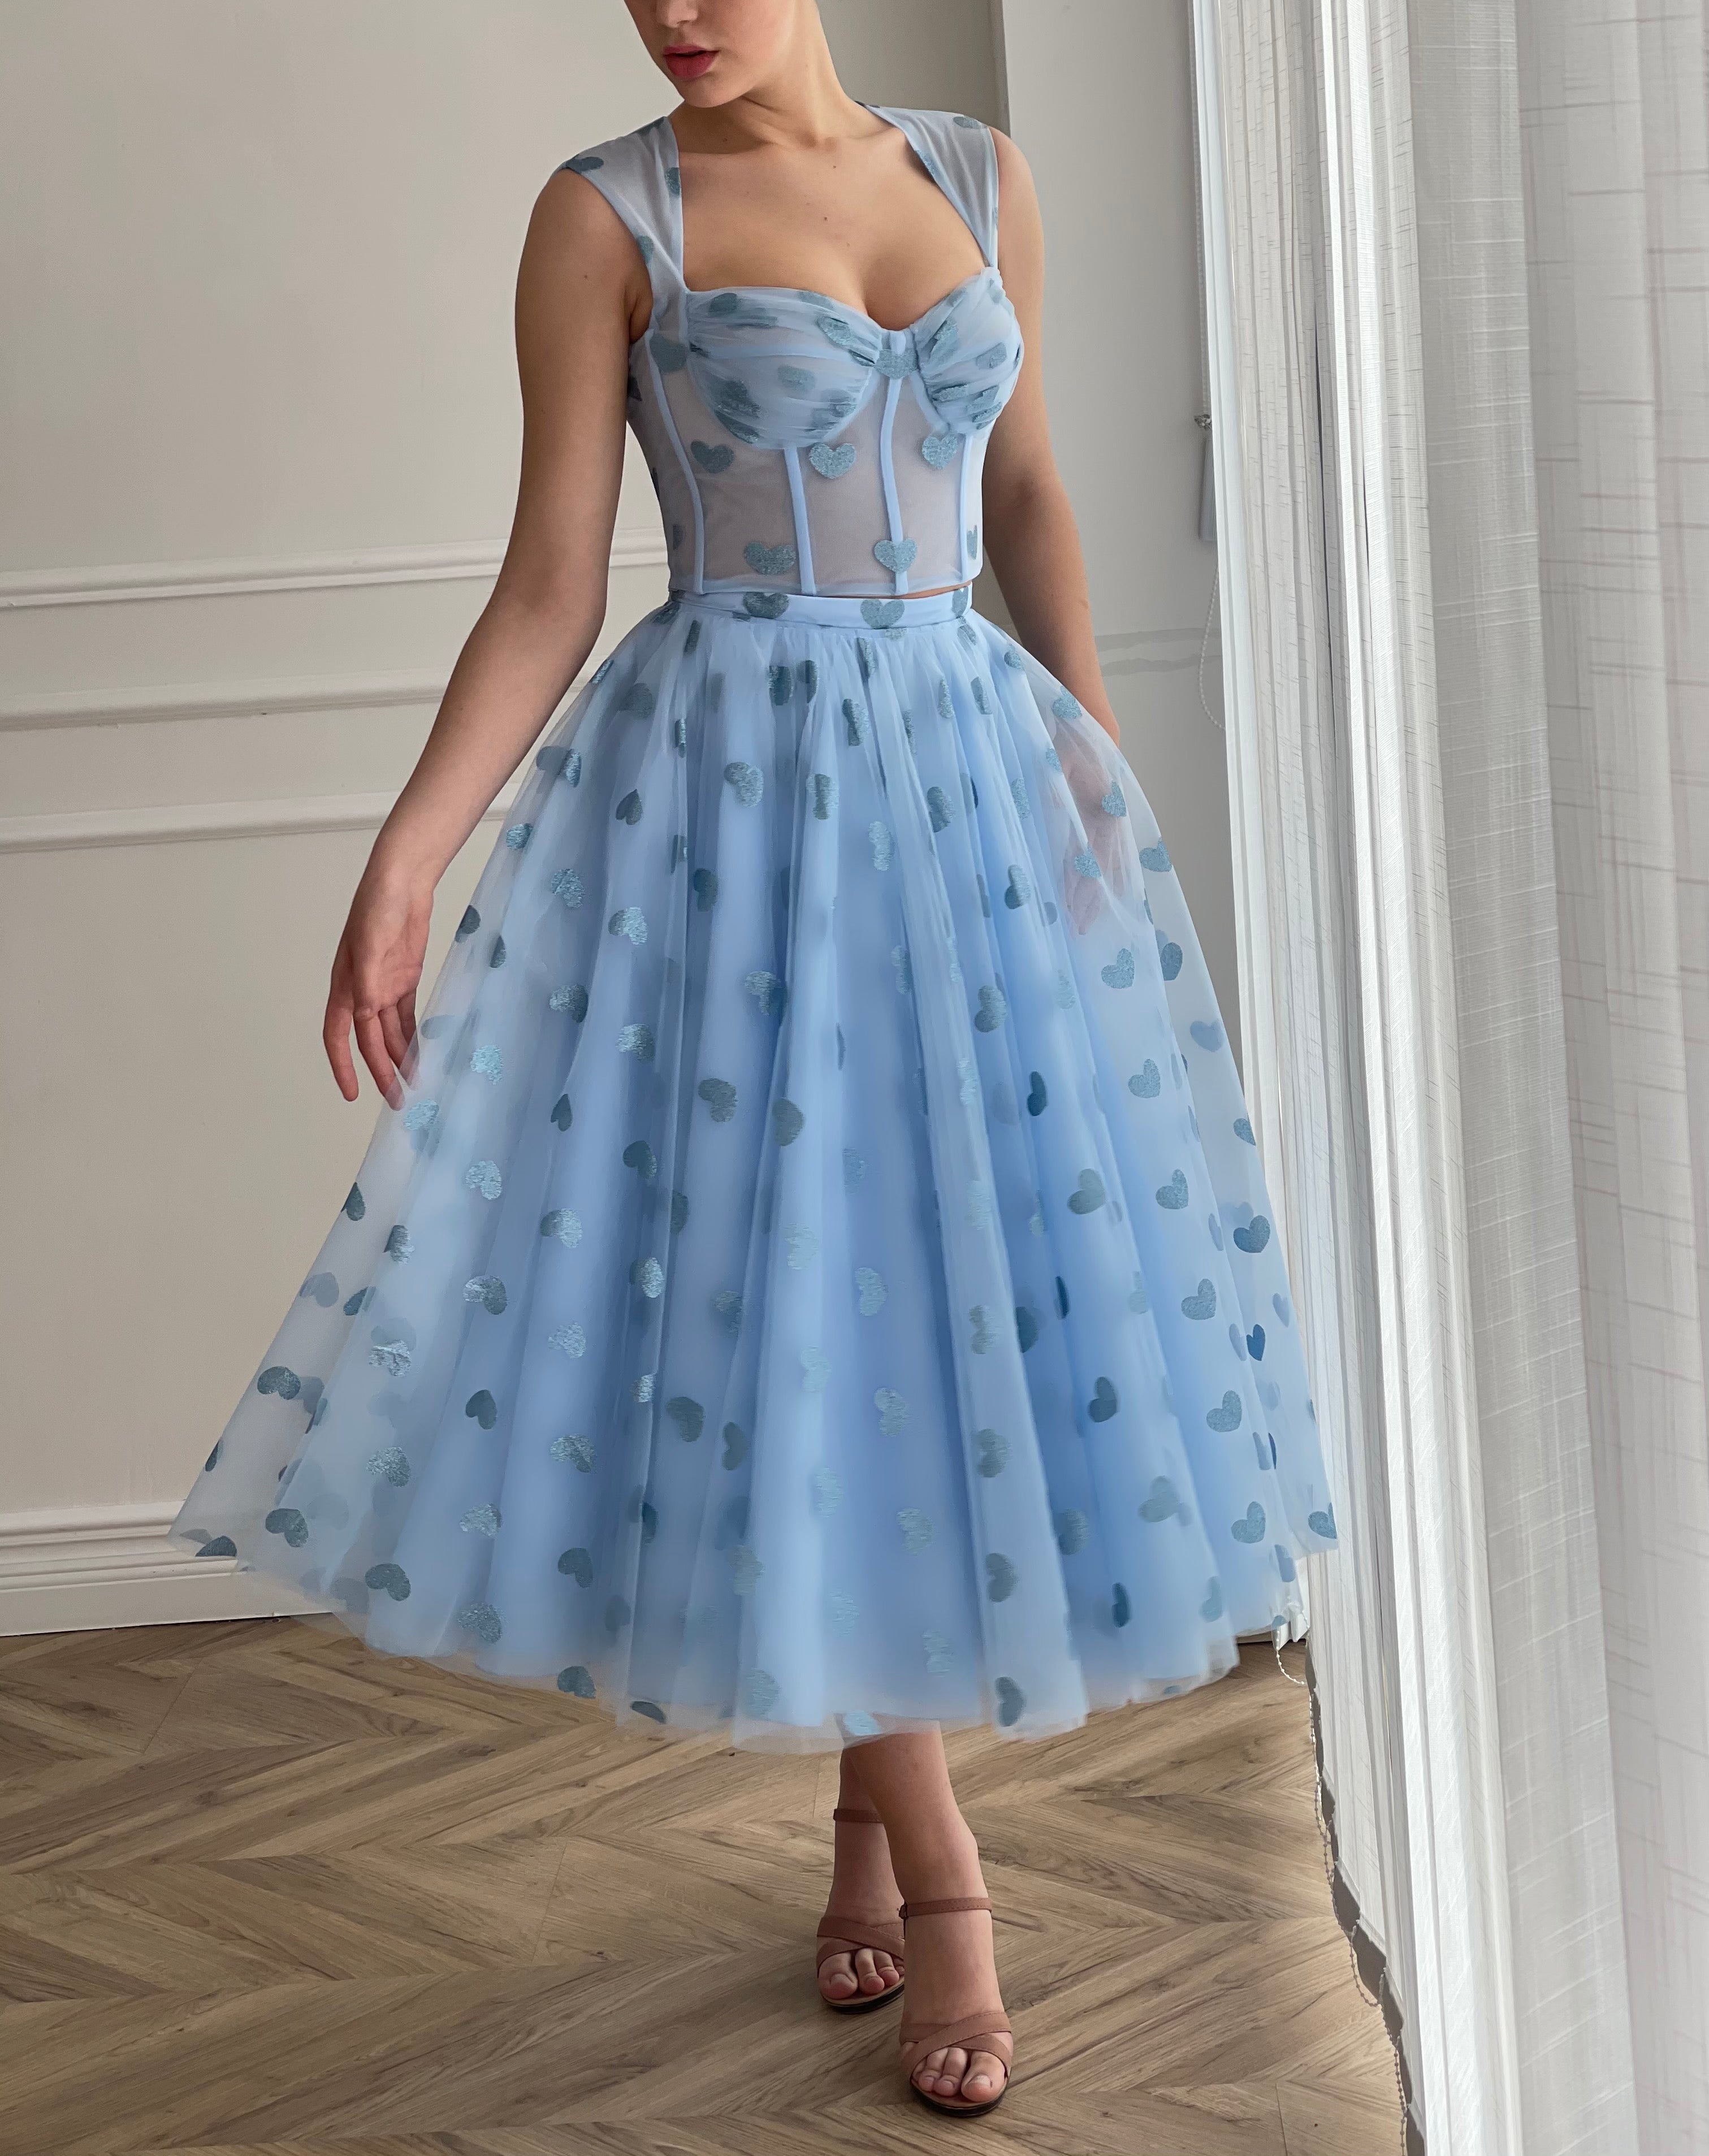 Blue two piece dress with straps and hearty fabric